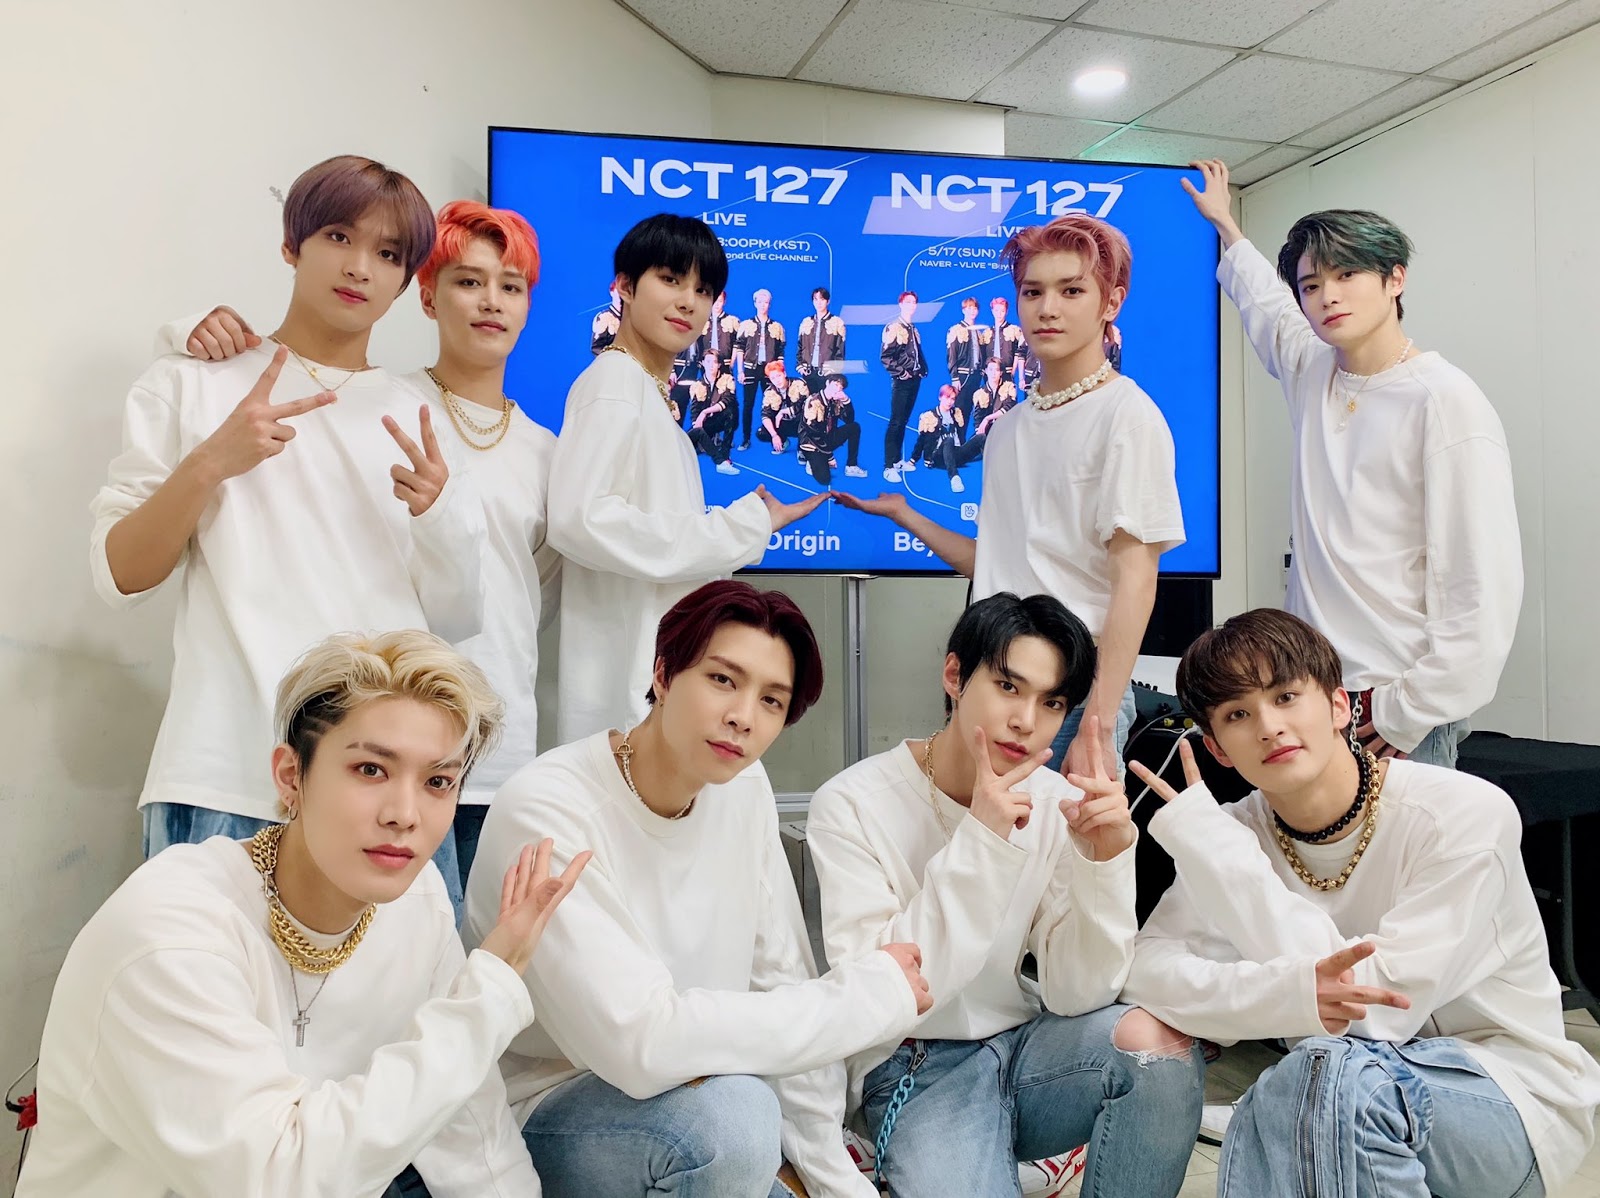 NCT 127 Achieve Million Seller Status After Breaking Their Own Record